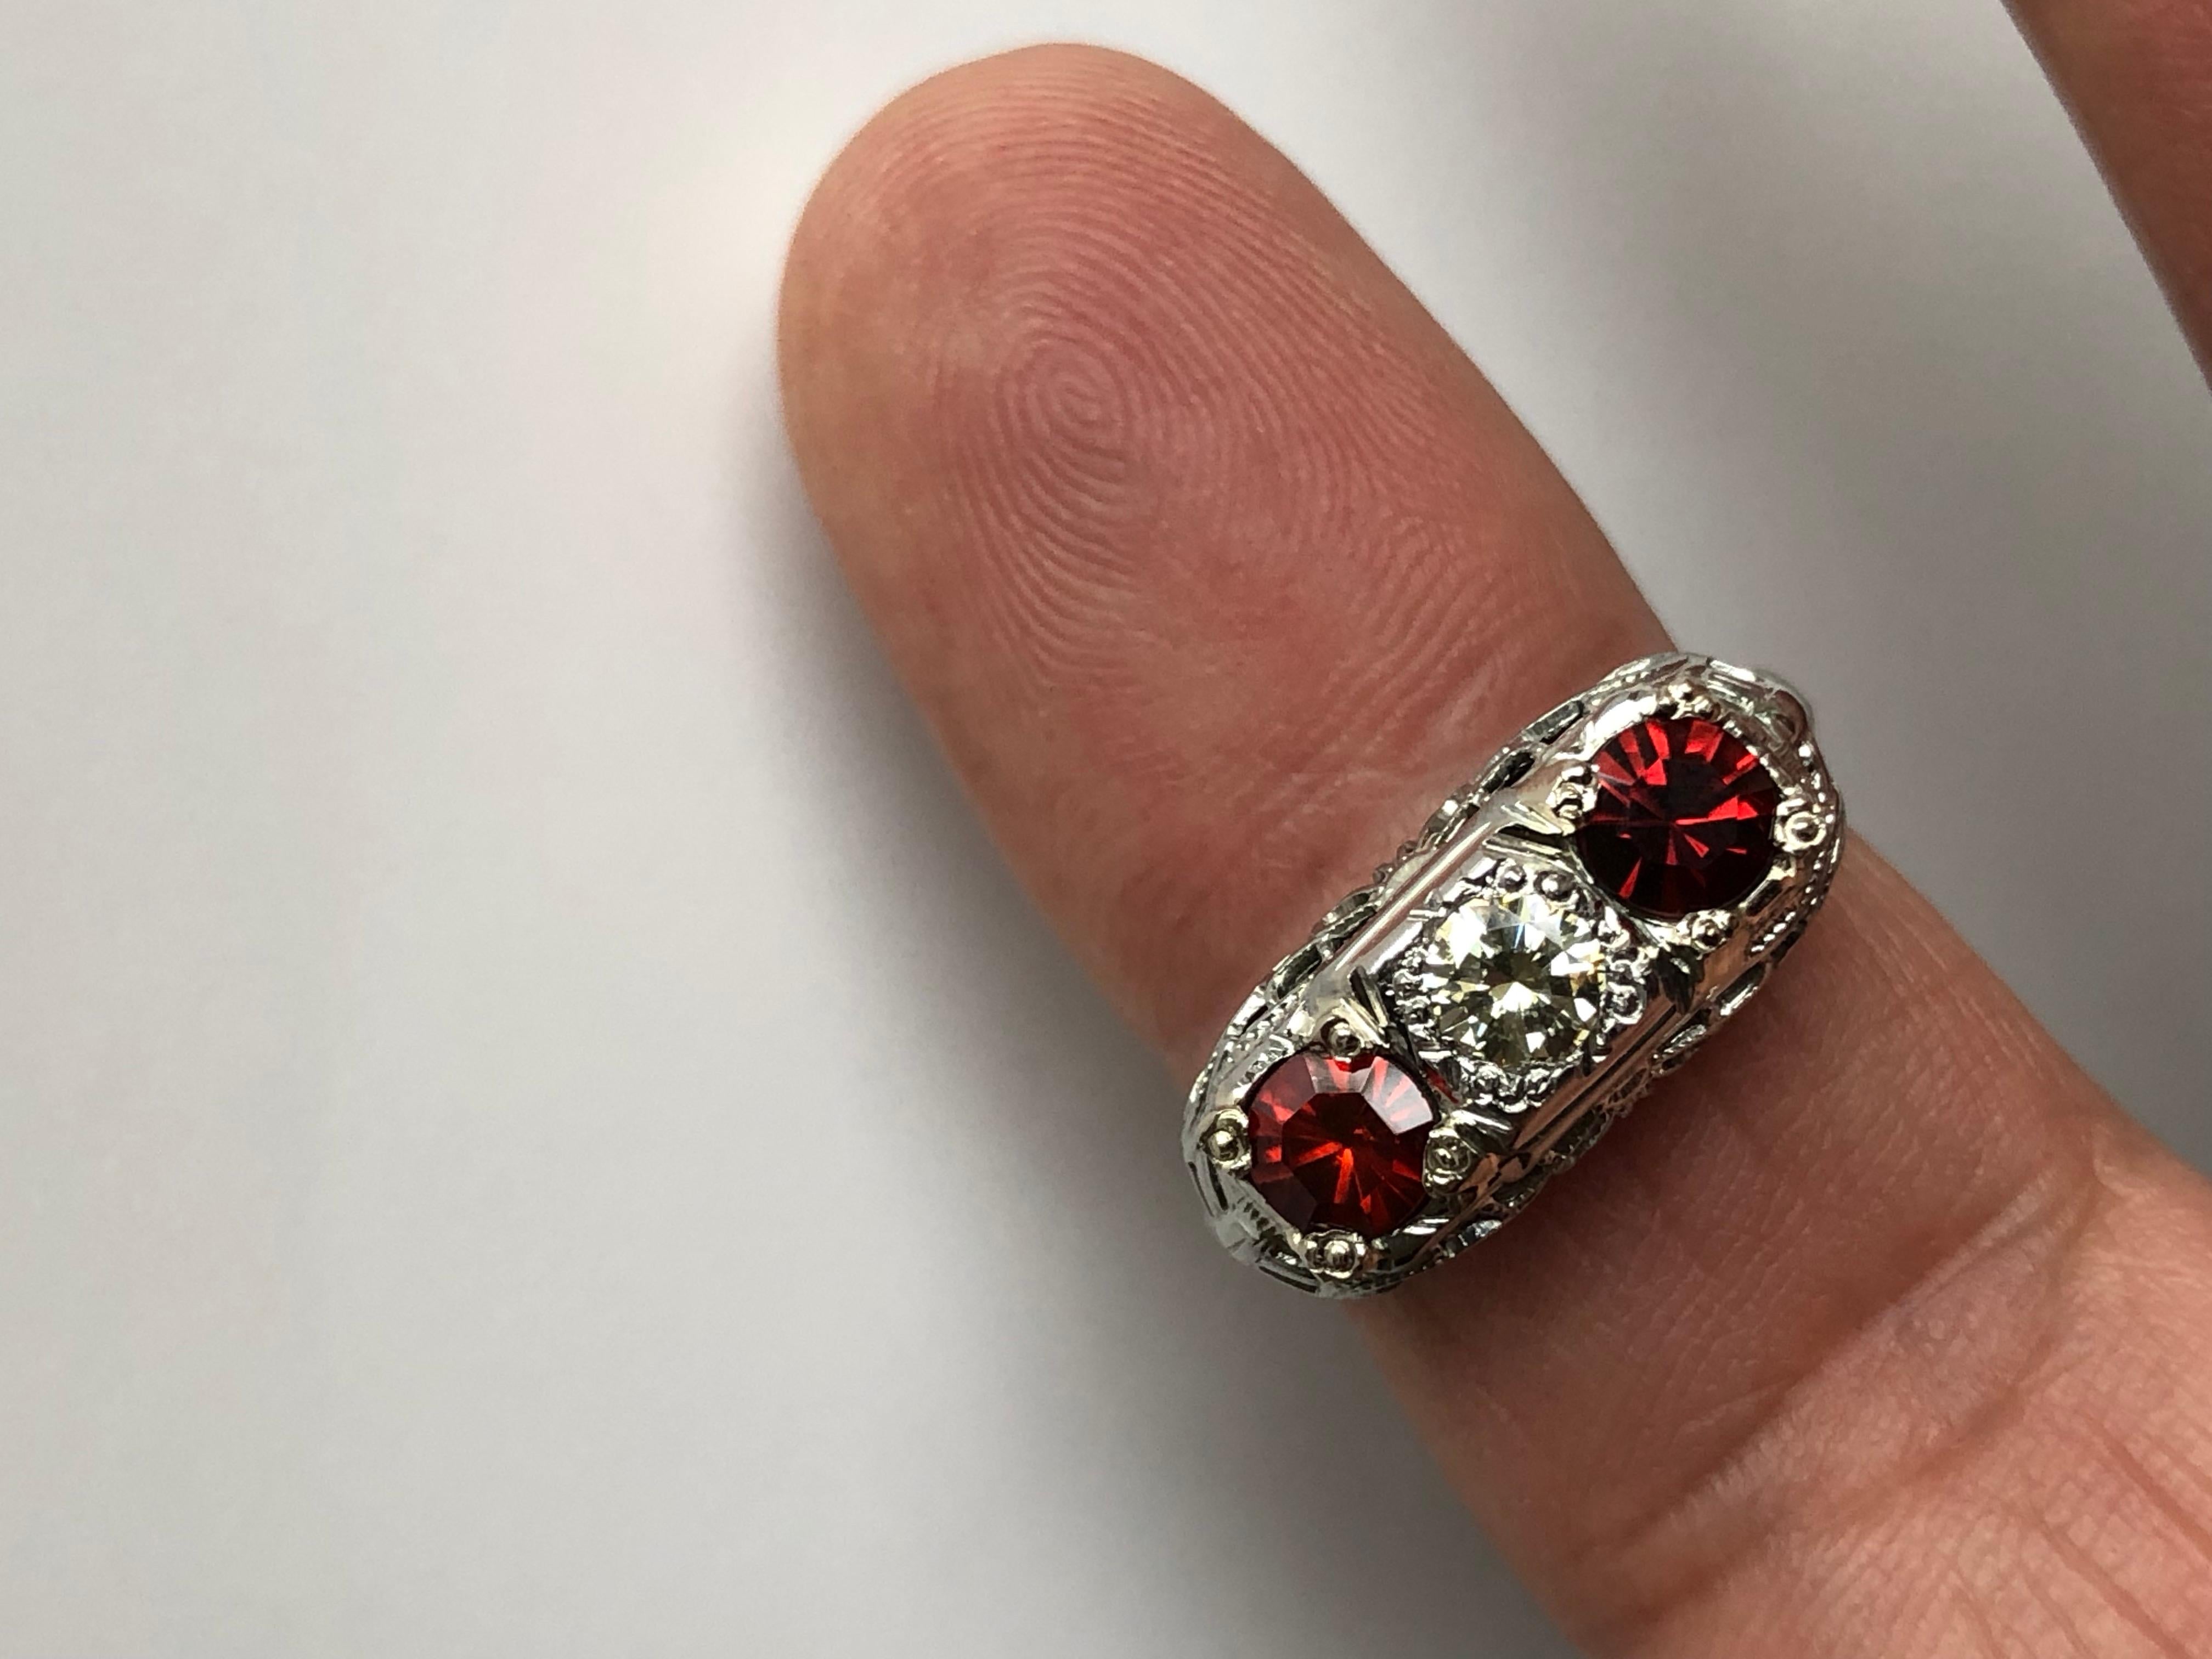 1940 raised top filigree Art Deco Style ring centering a sparkly round cut diamond weighing approx. 0.30 carat color N, VS. And on each side a gorgeous red-orange spinel round cut VS approx. .90 carats total weigh.
Total Gemstone weight: Approx.